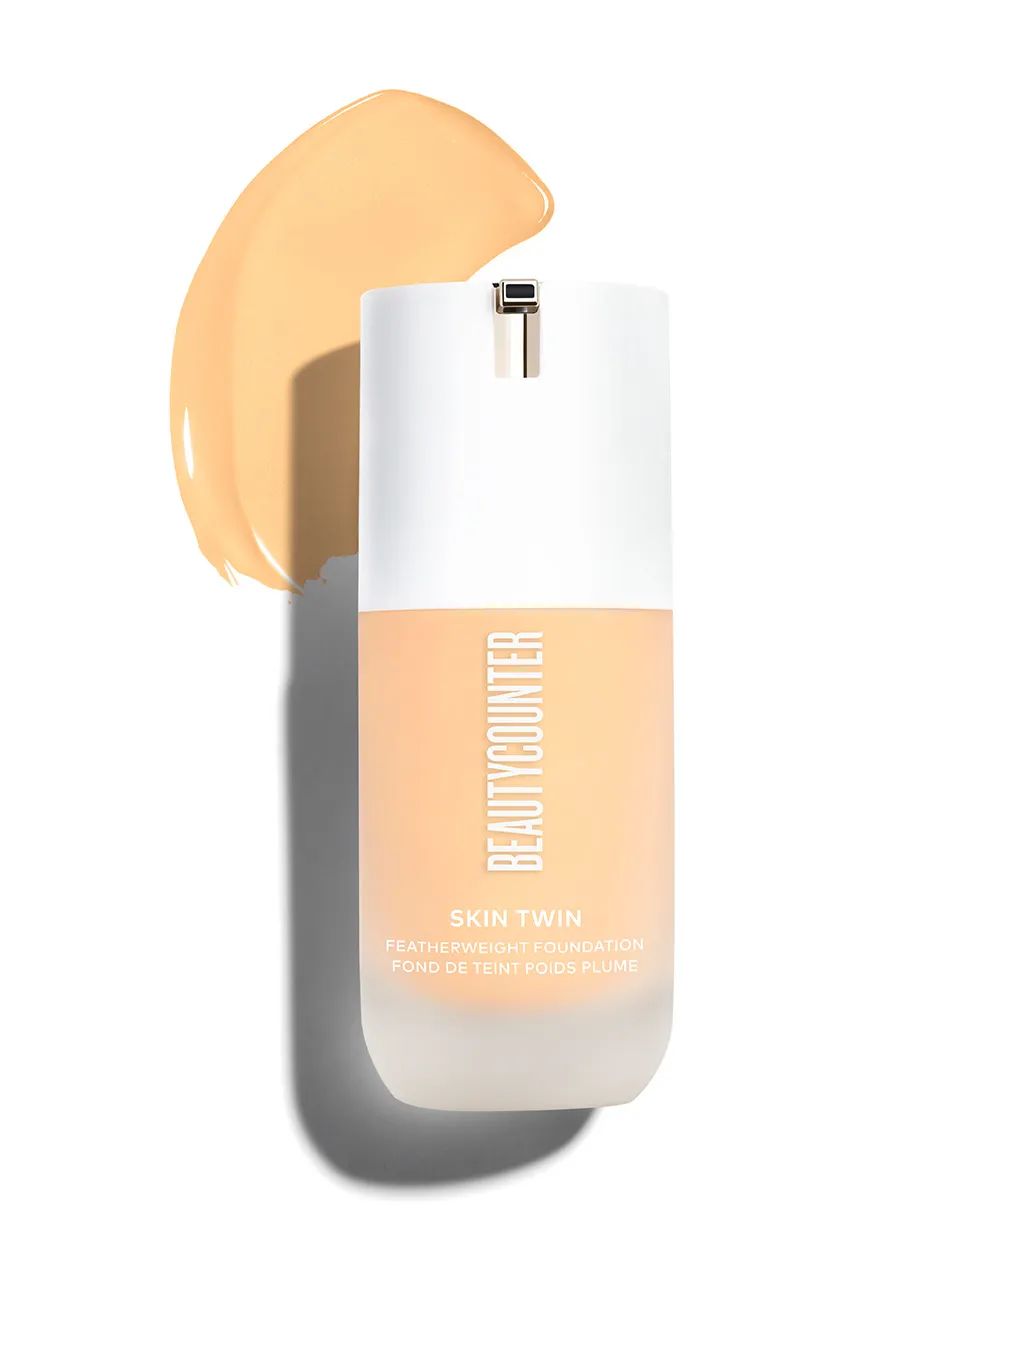 Skin Twin Featherweight Foundation - Beautycounter - Skin Care, Makeup, Bath and Body and more! | Beautycounter.com